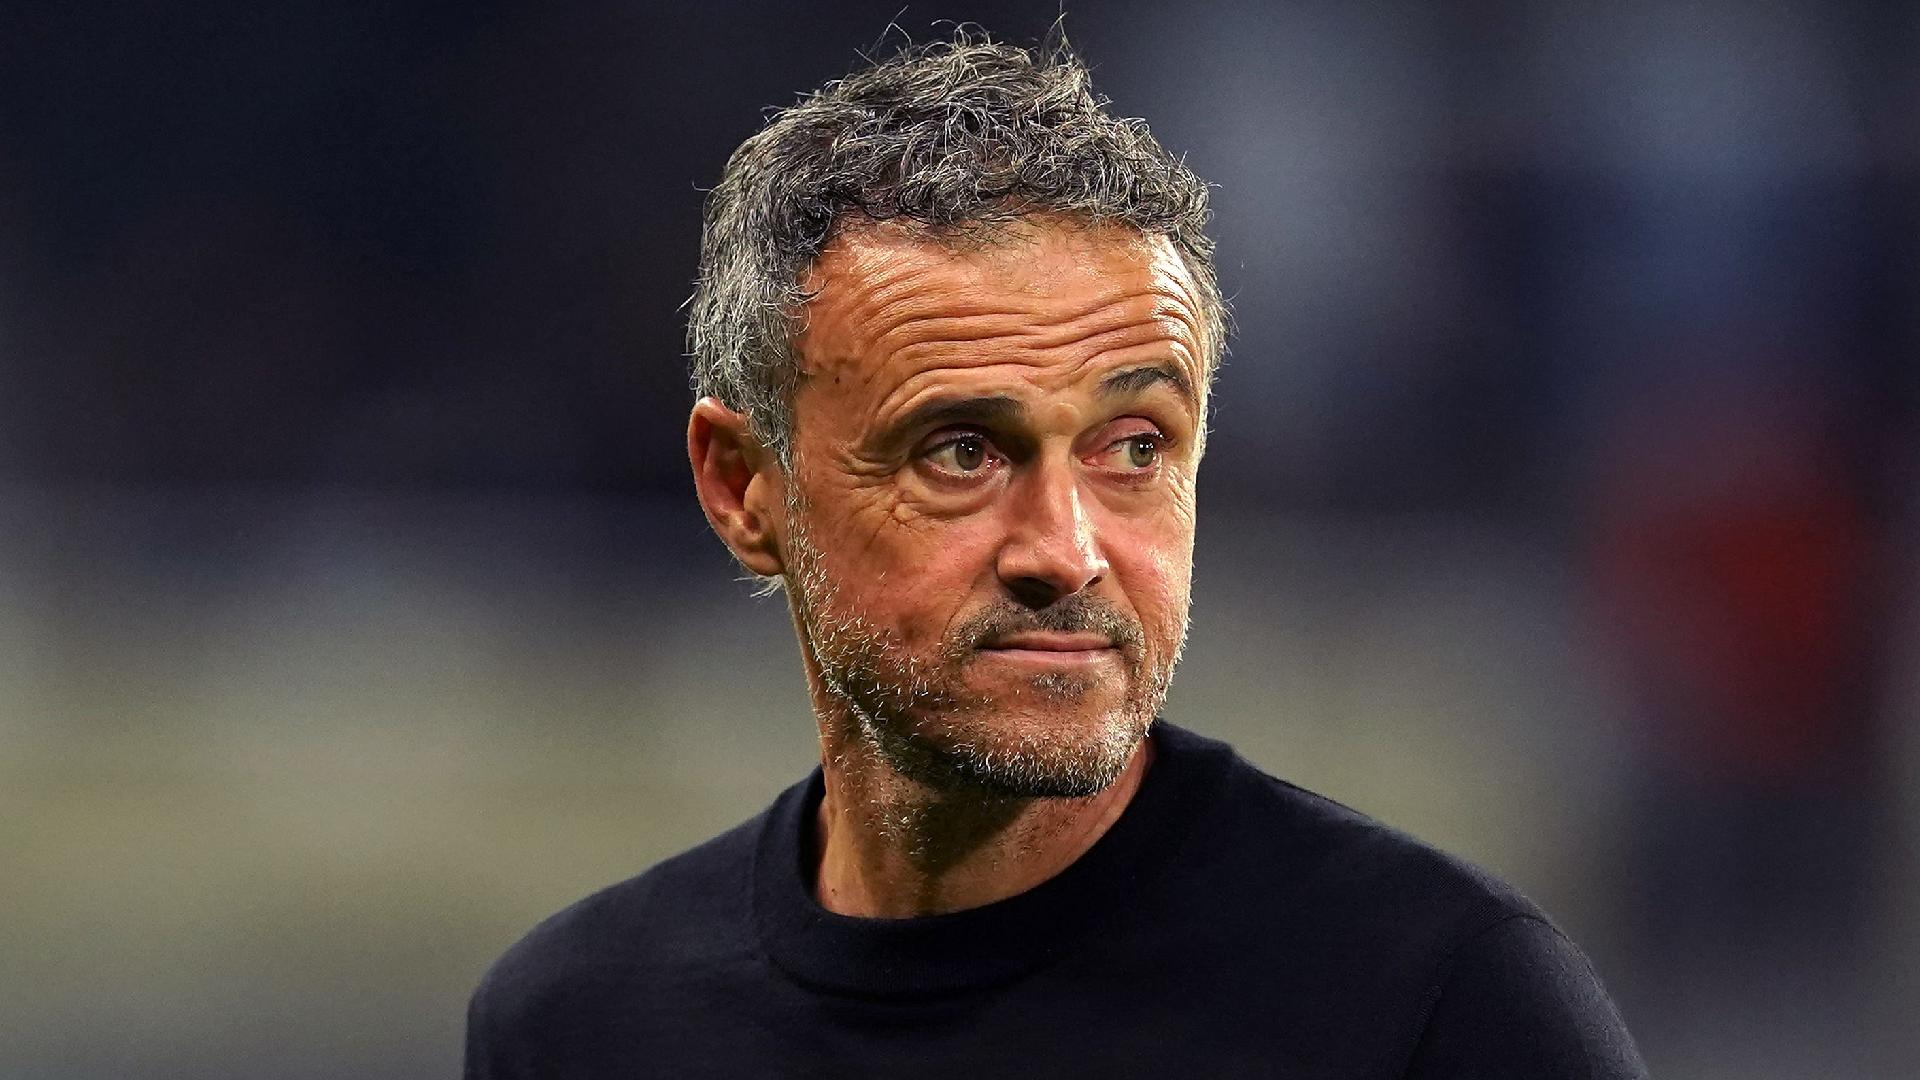 Martin Rickett/PA : Paris St Germain boss Luis Enrique has told his players to forget about Wednesday night’s Champions League clash with Barcelona.